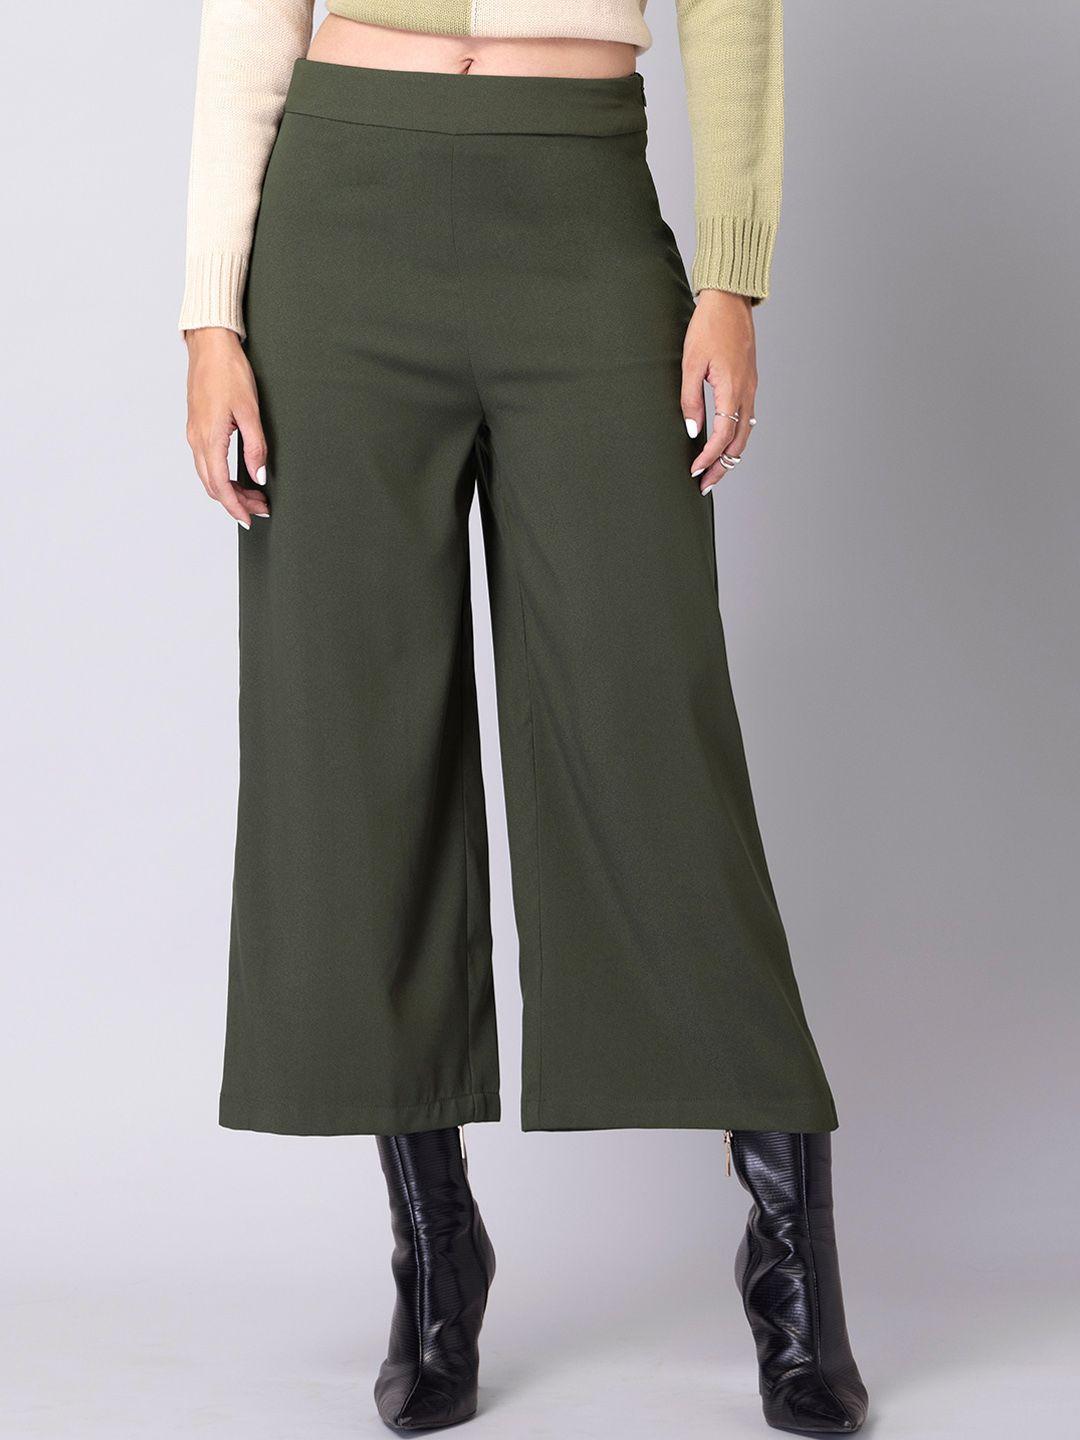 faballey women olive green culottes trousers